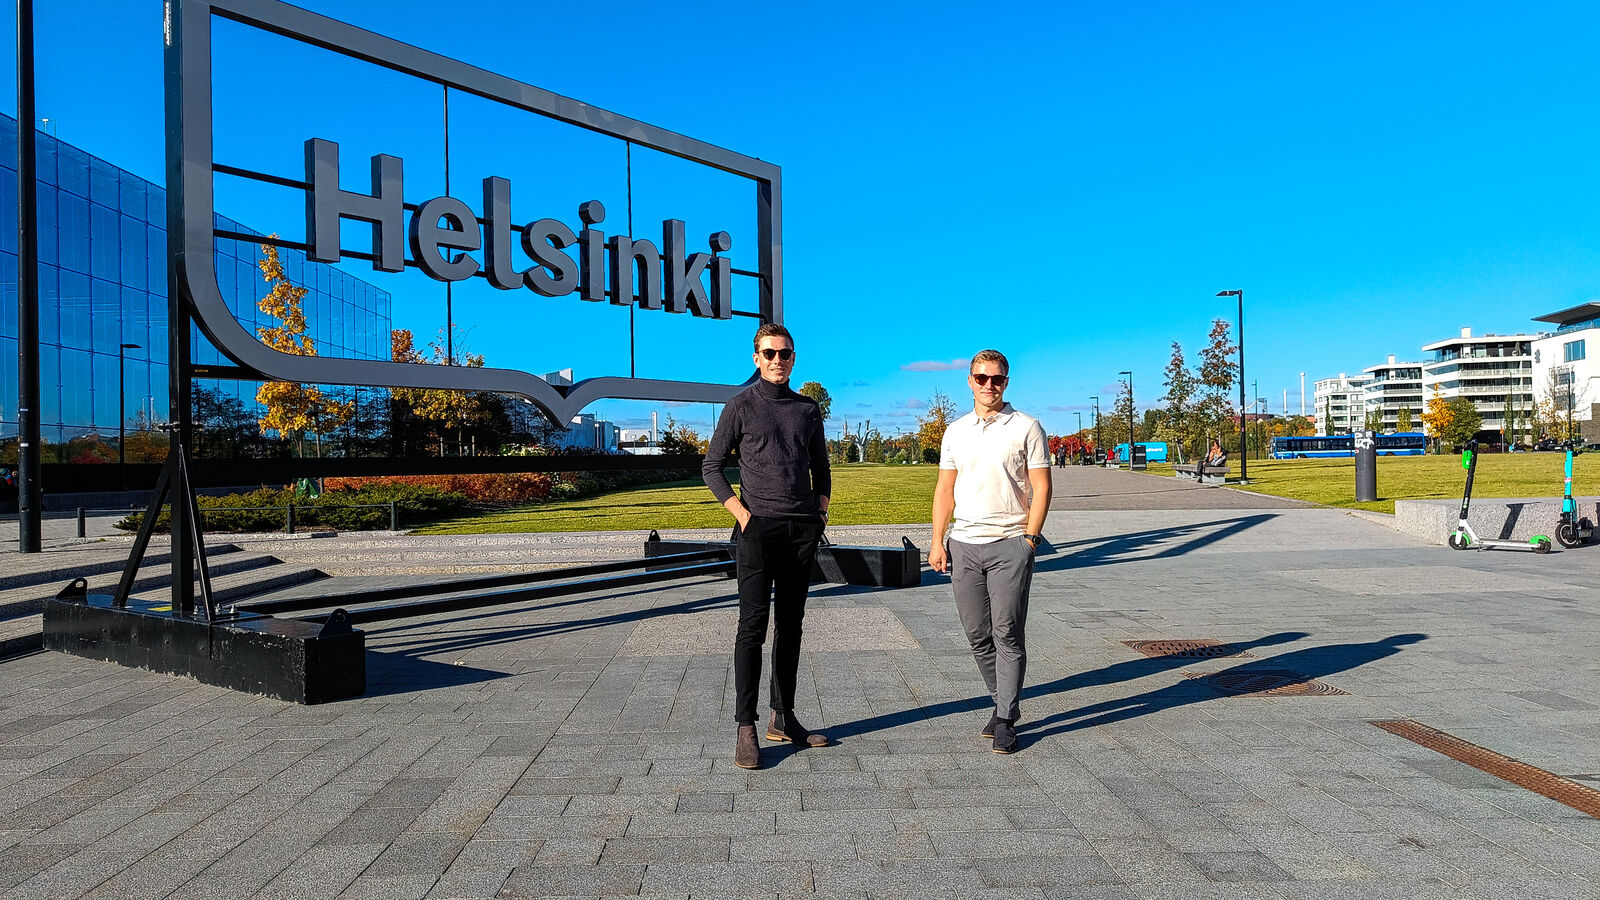 ISE students Even and Stian standing in front of Helsinki Sign